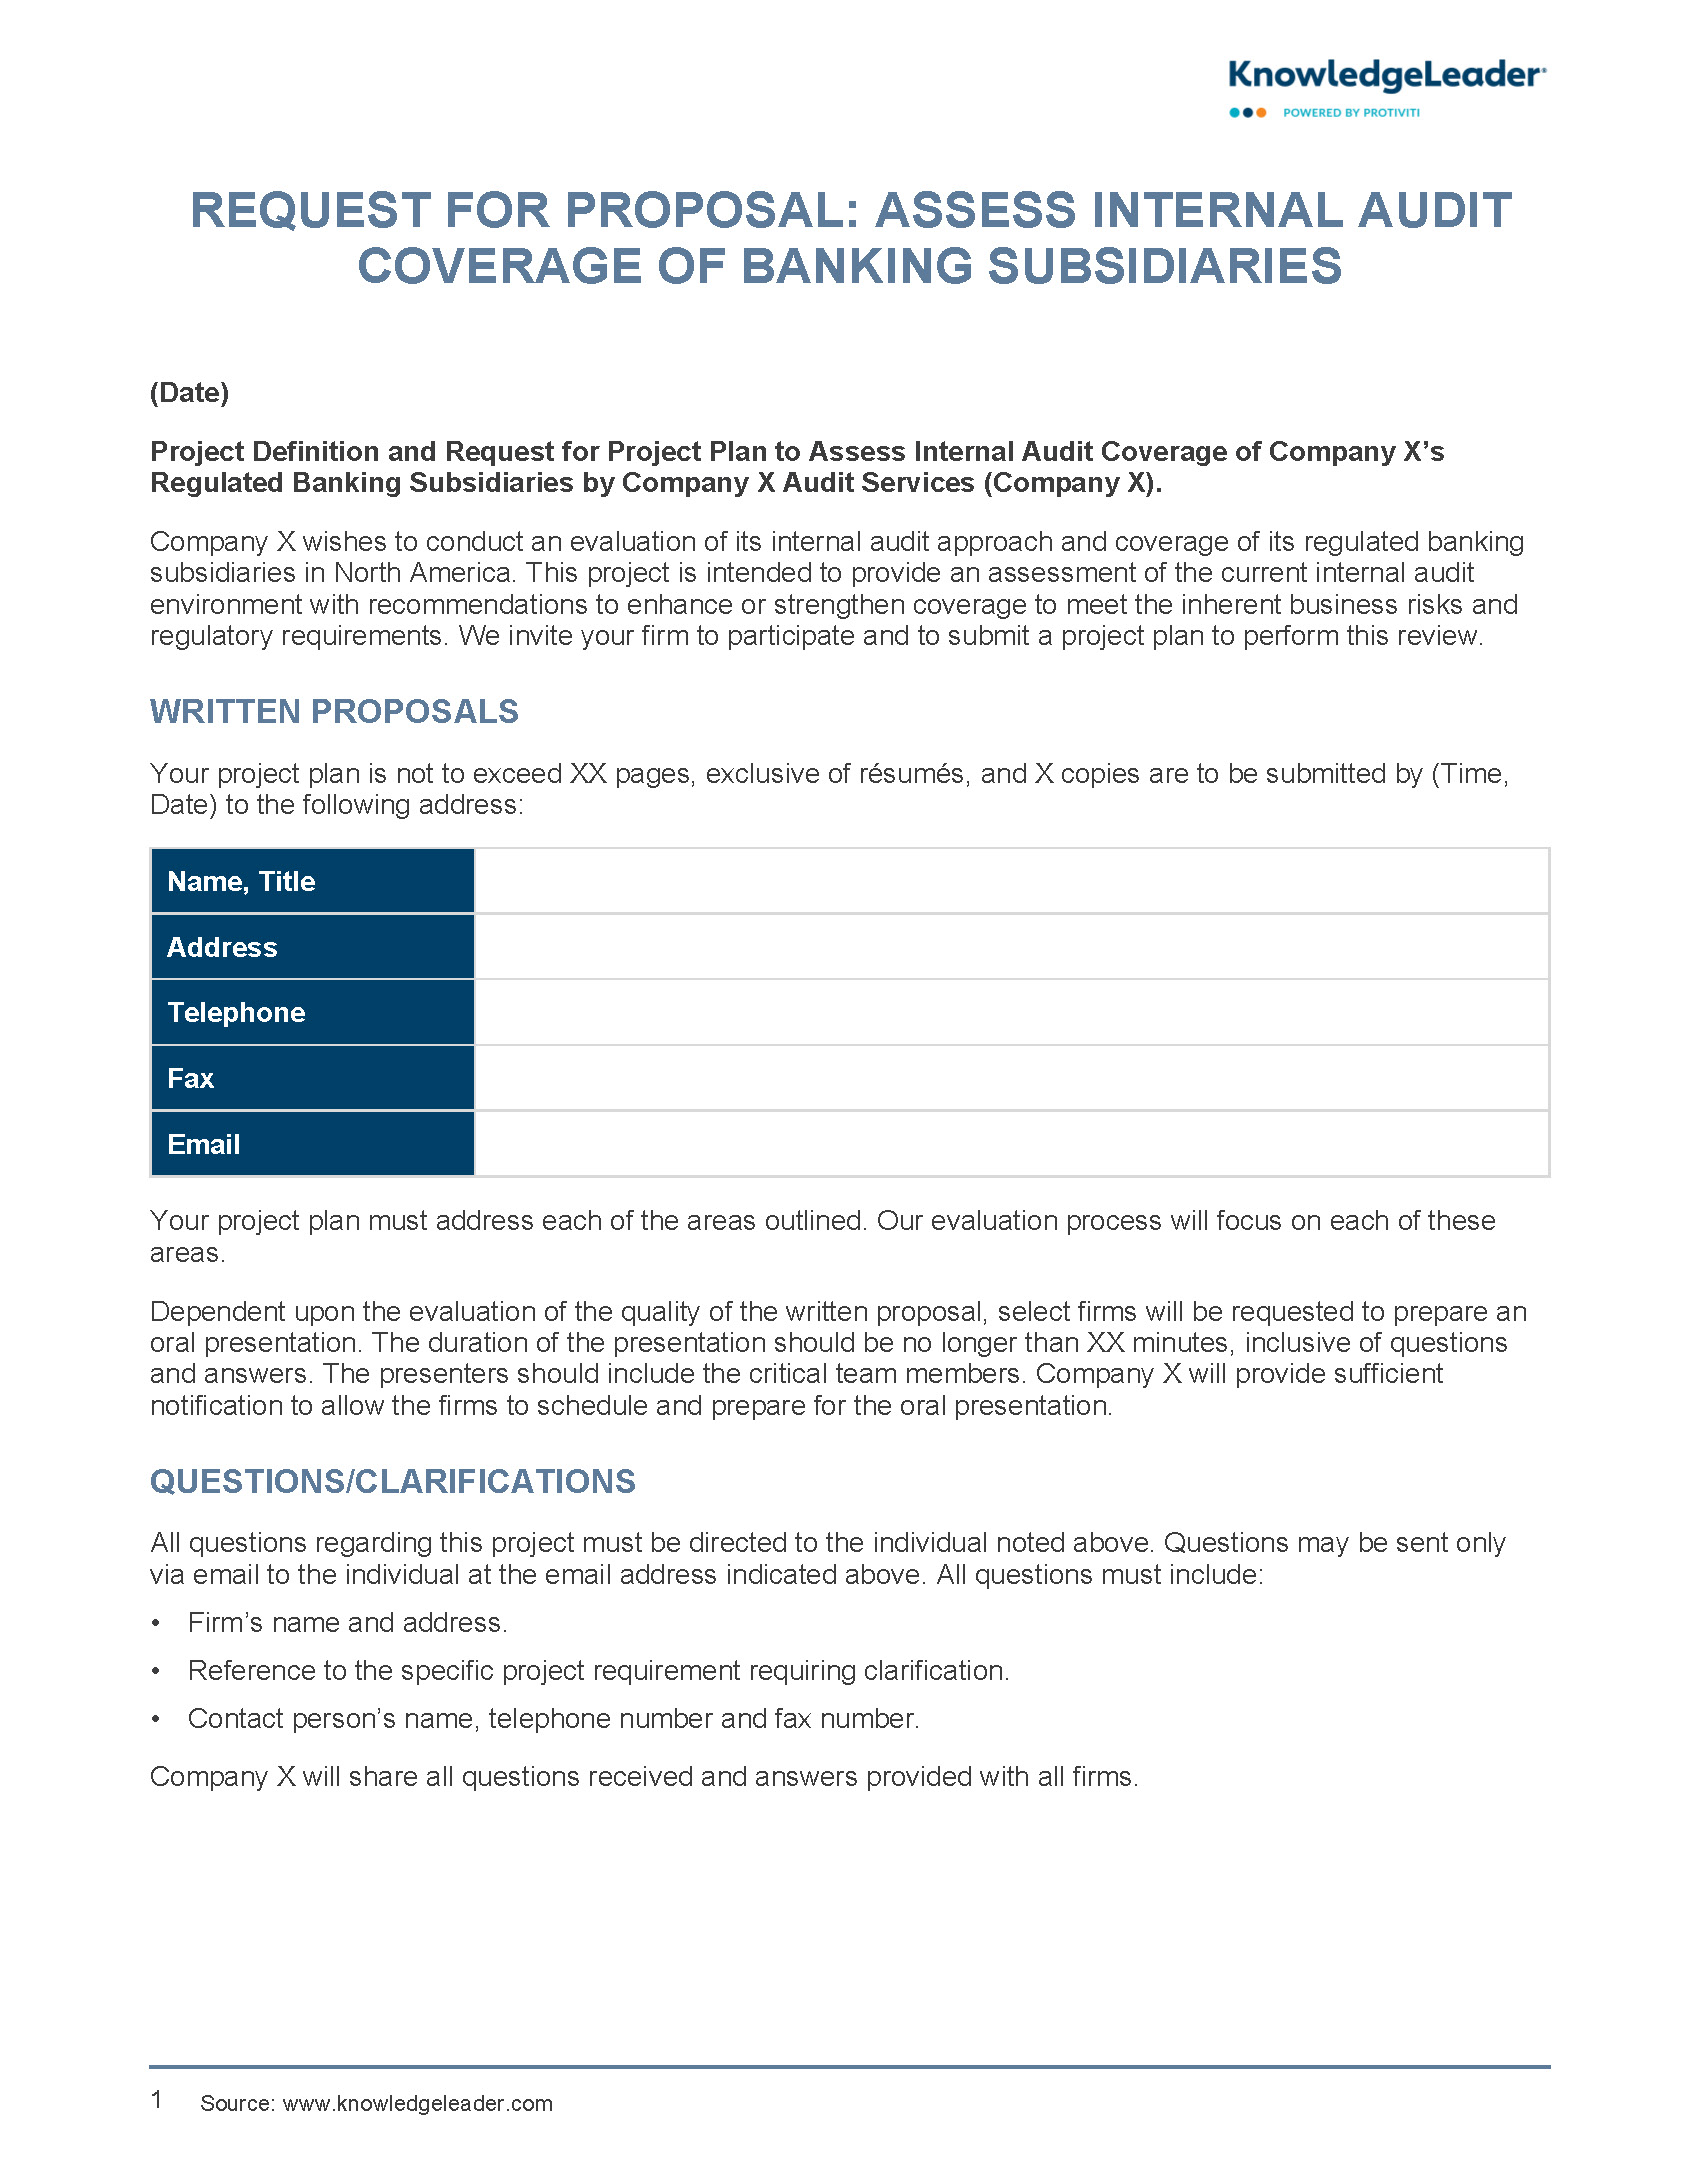 Request for Proposal Assess Internal Audit Coverage of Banking Subsidiaries